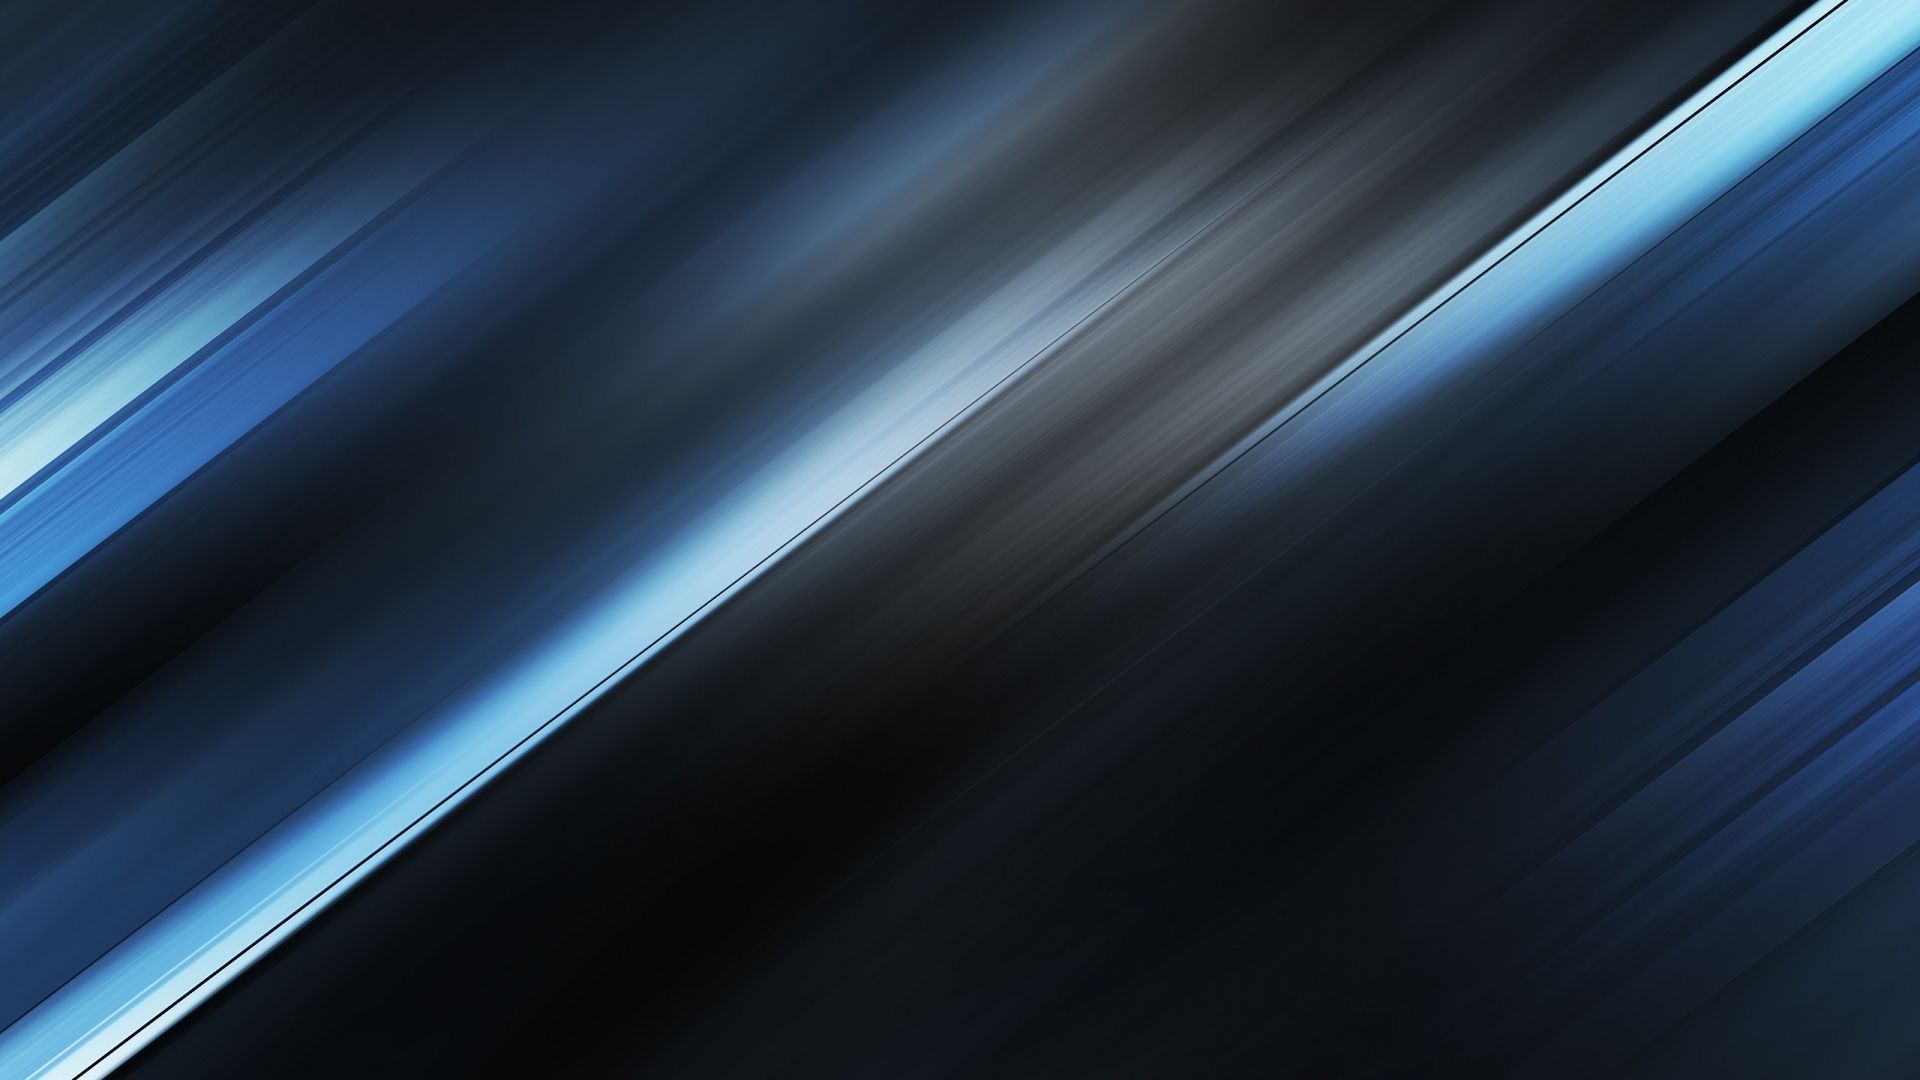 Cool Blue Abstract Iphone Wallpapers